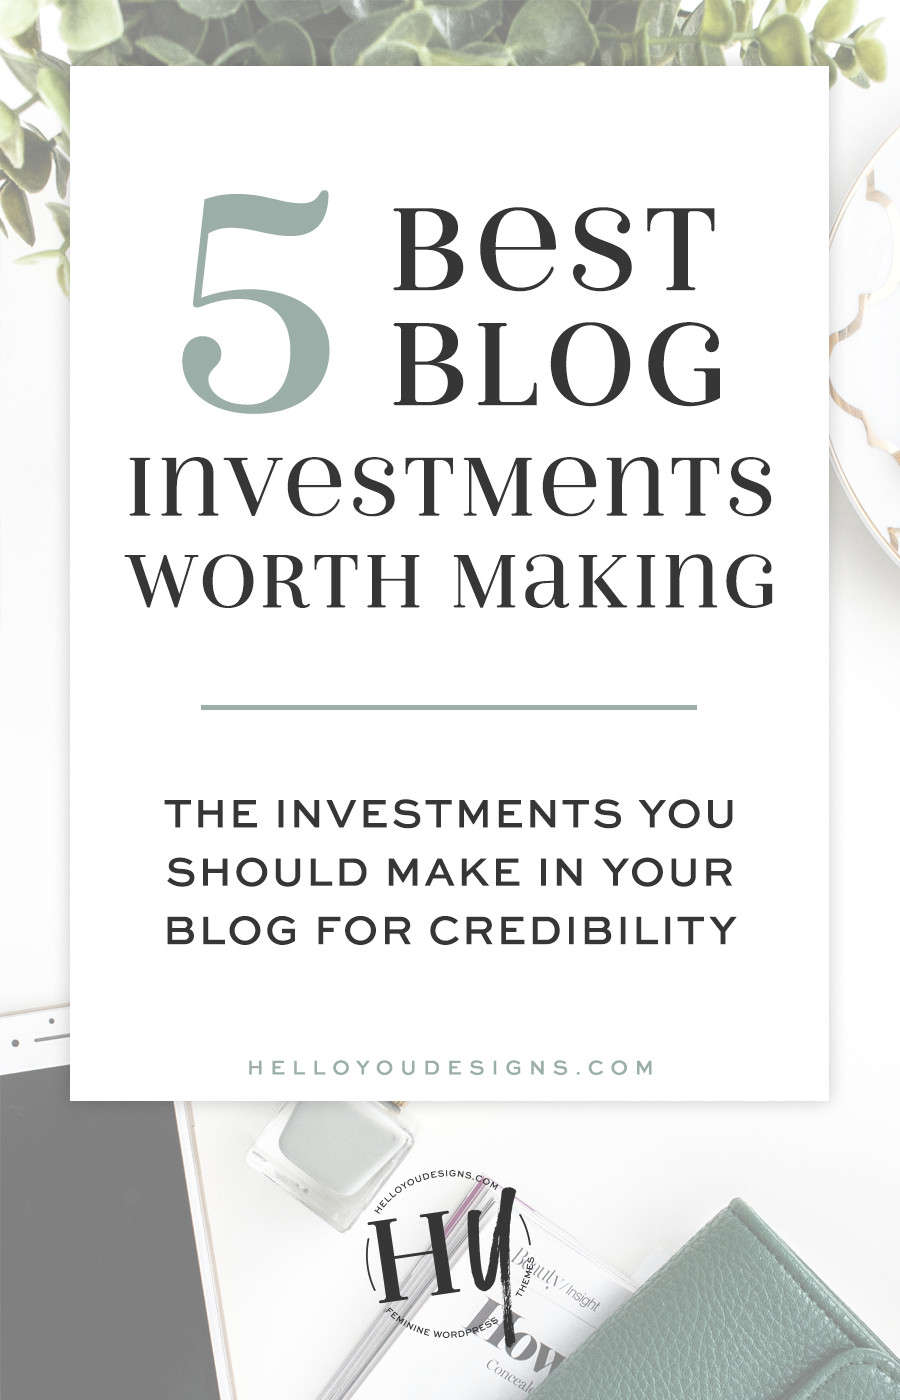 5 Blog Investments Worth Making